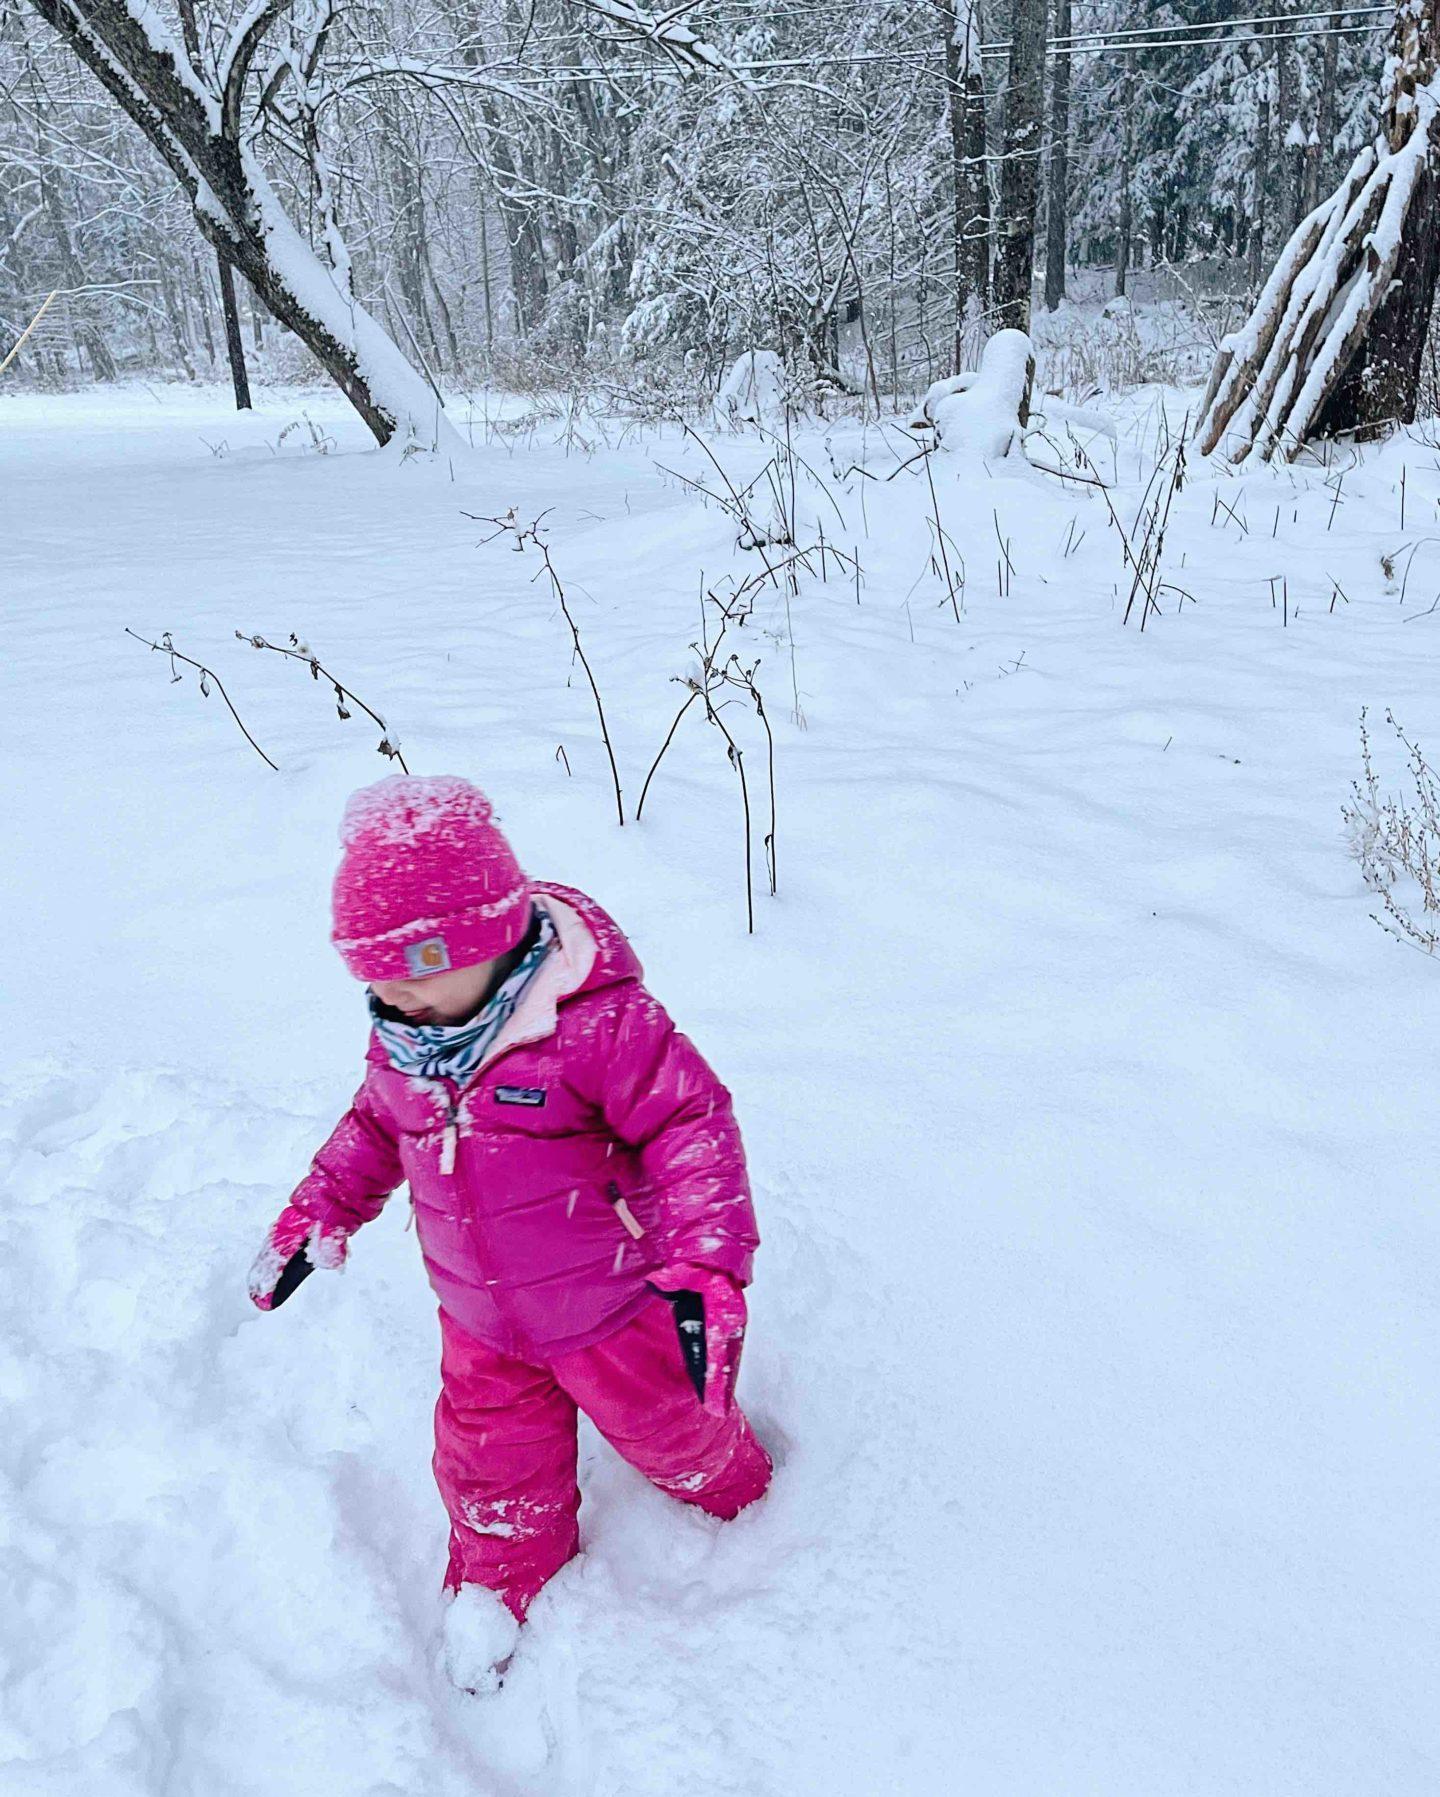 Snow Gear for Toddlers  AlsWell Blog - Lifestyle, Fashion